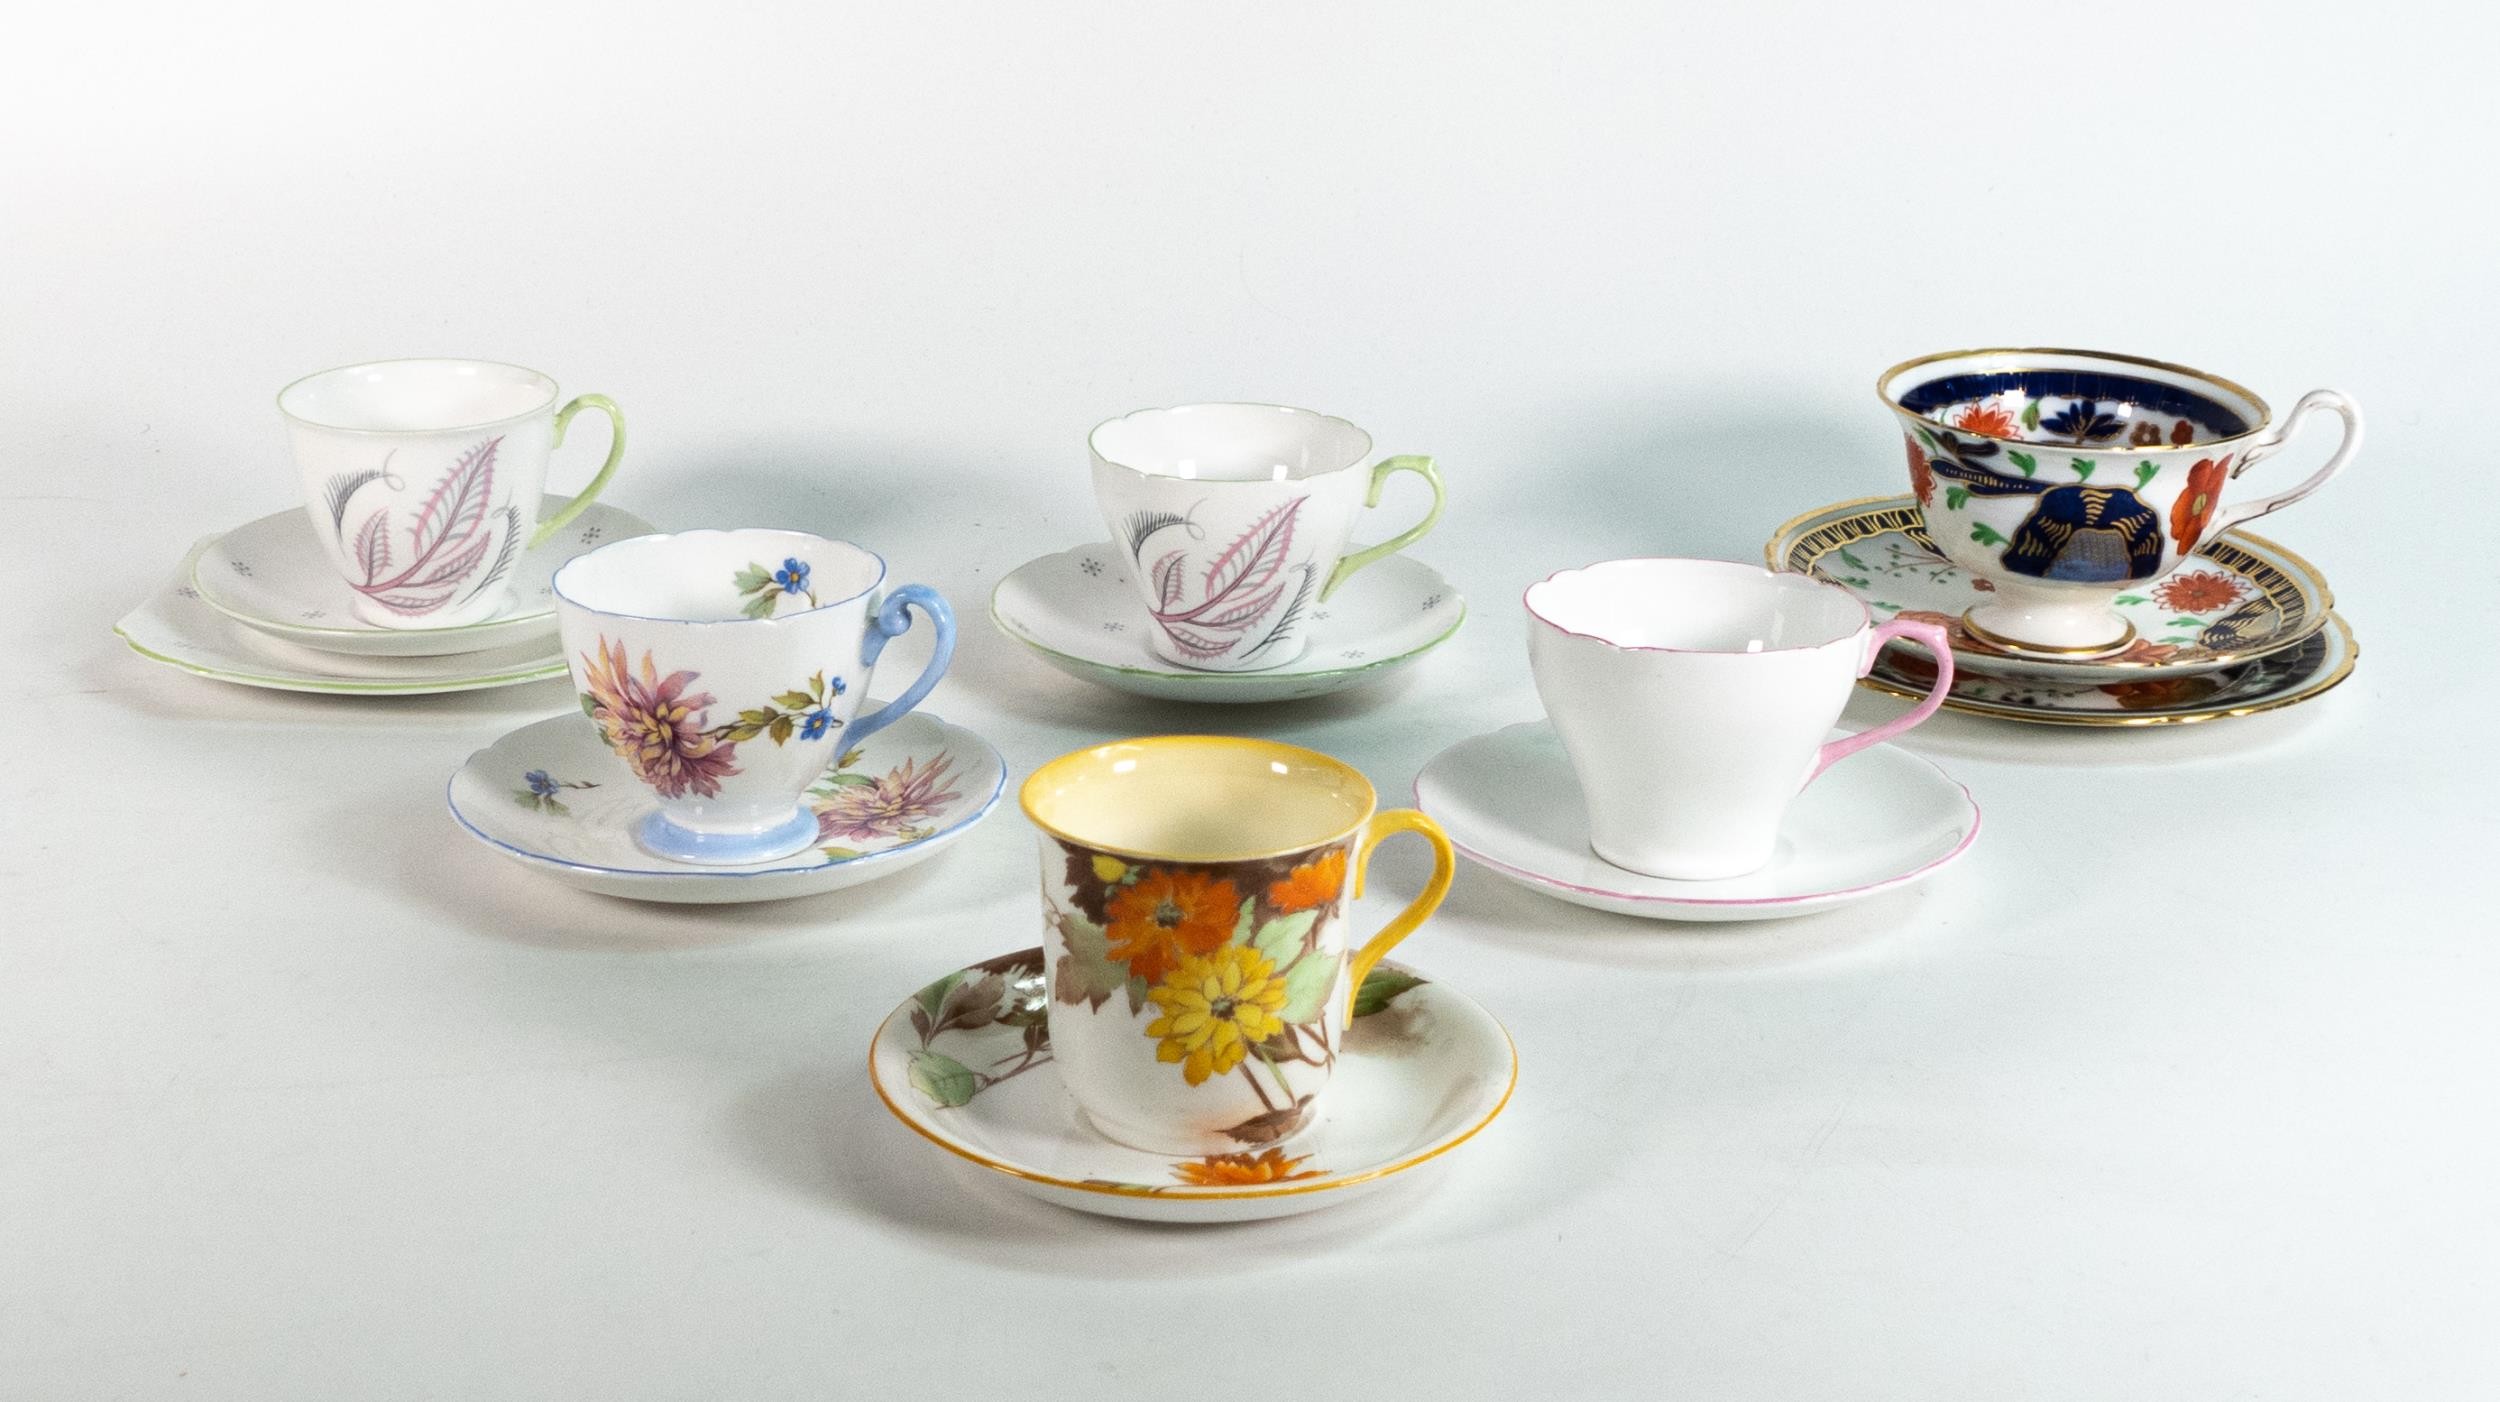 Two Shelley trios and 4 coffee cups & saucers to include patterns - Gainsborough 8524, Sterling, - Image 4 of 4